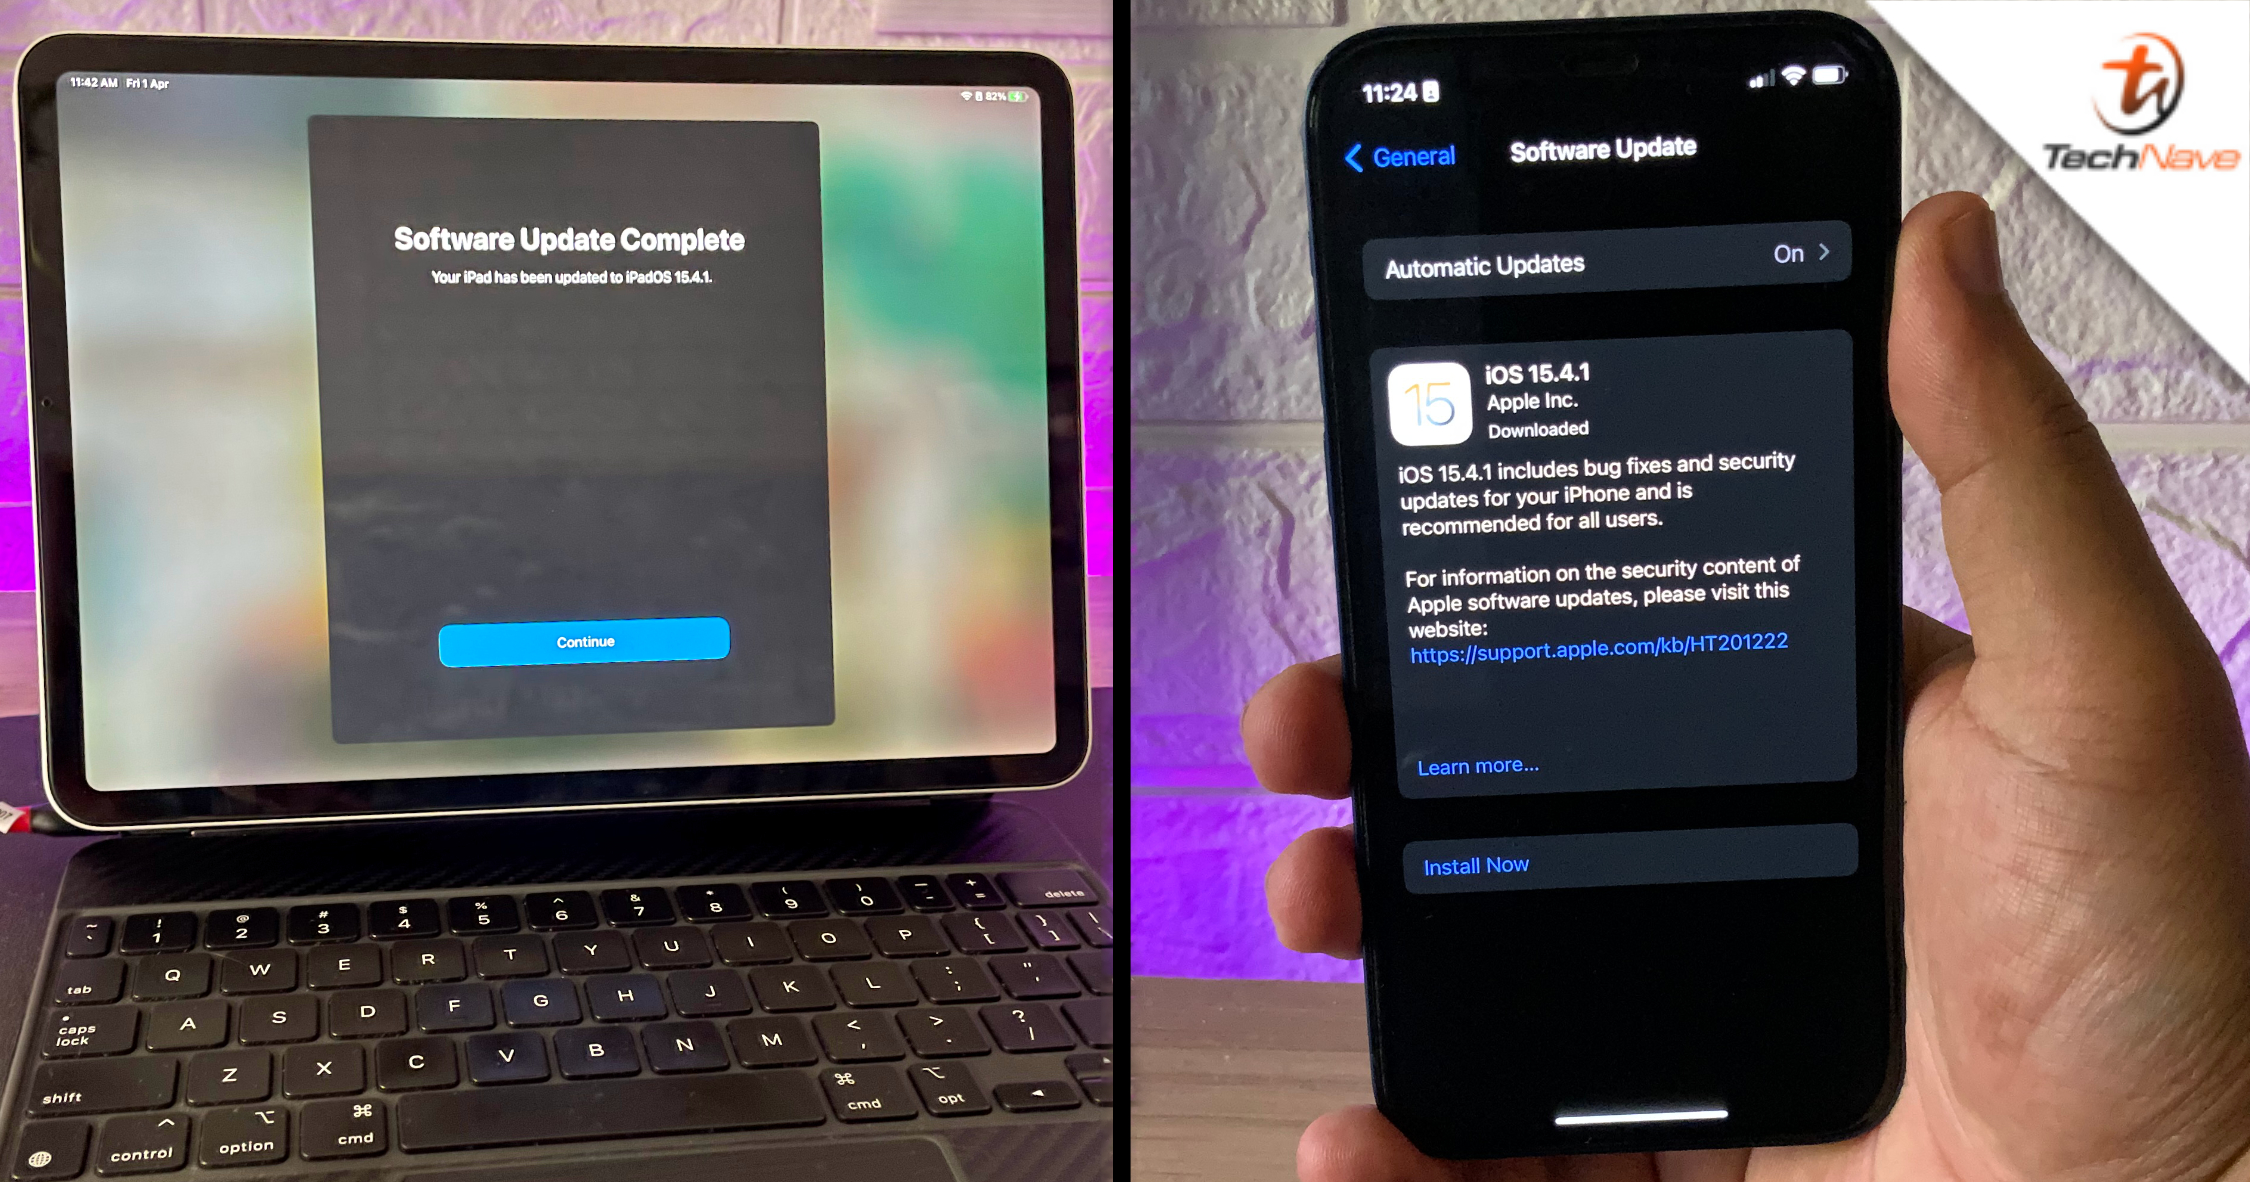 iOS and iPadOS 15.4.1 update now available for download from Apple, fixes battery drain issues